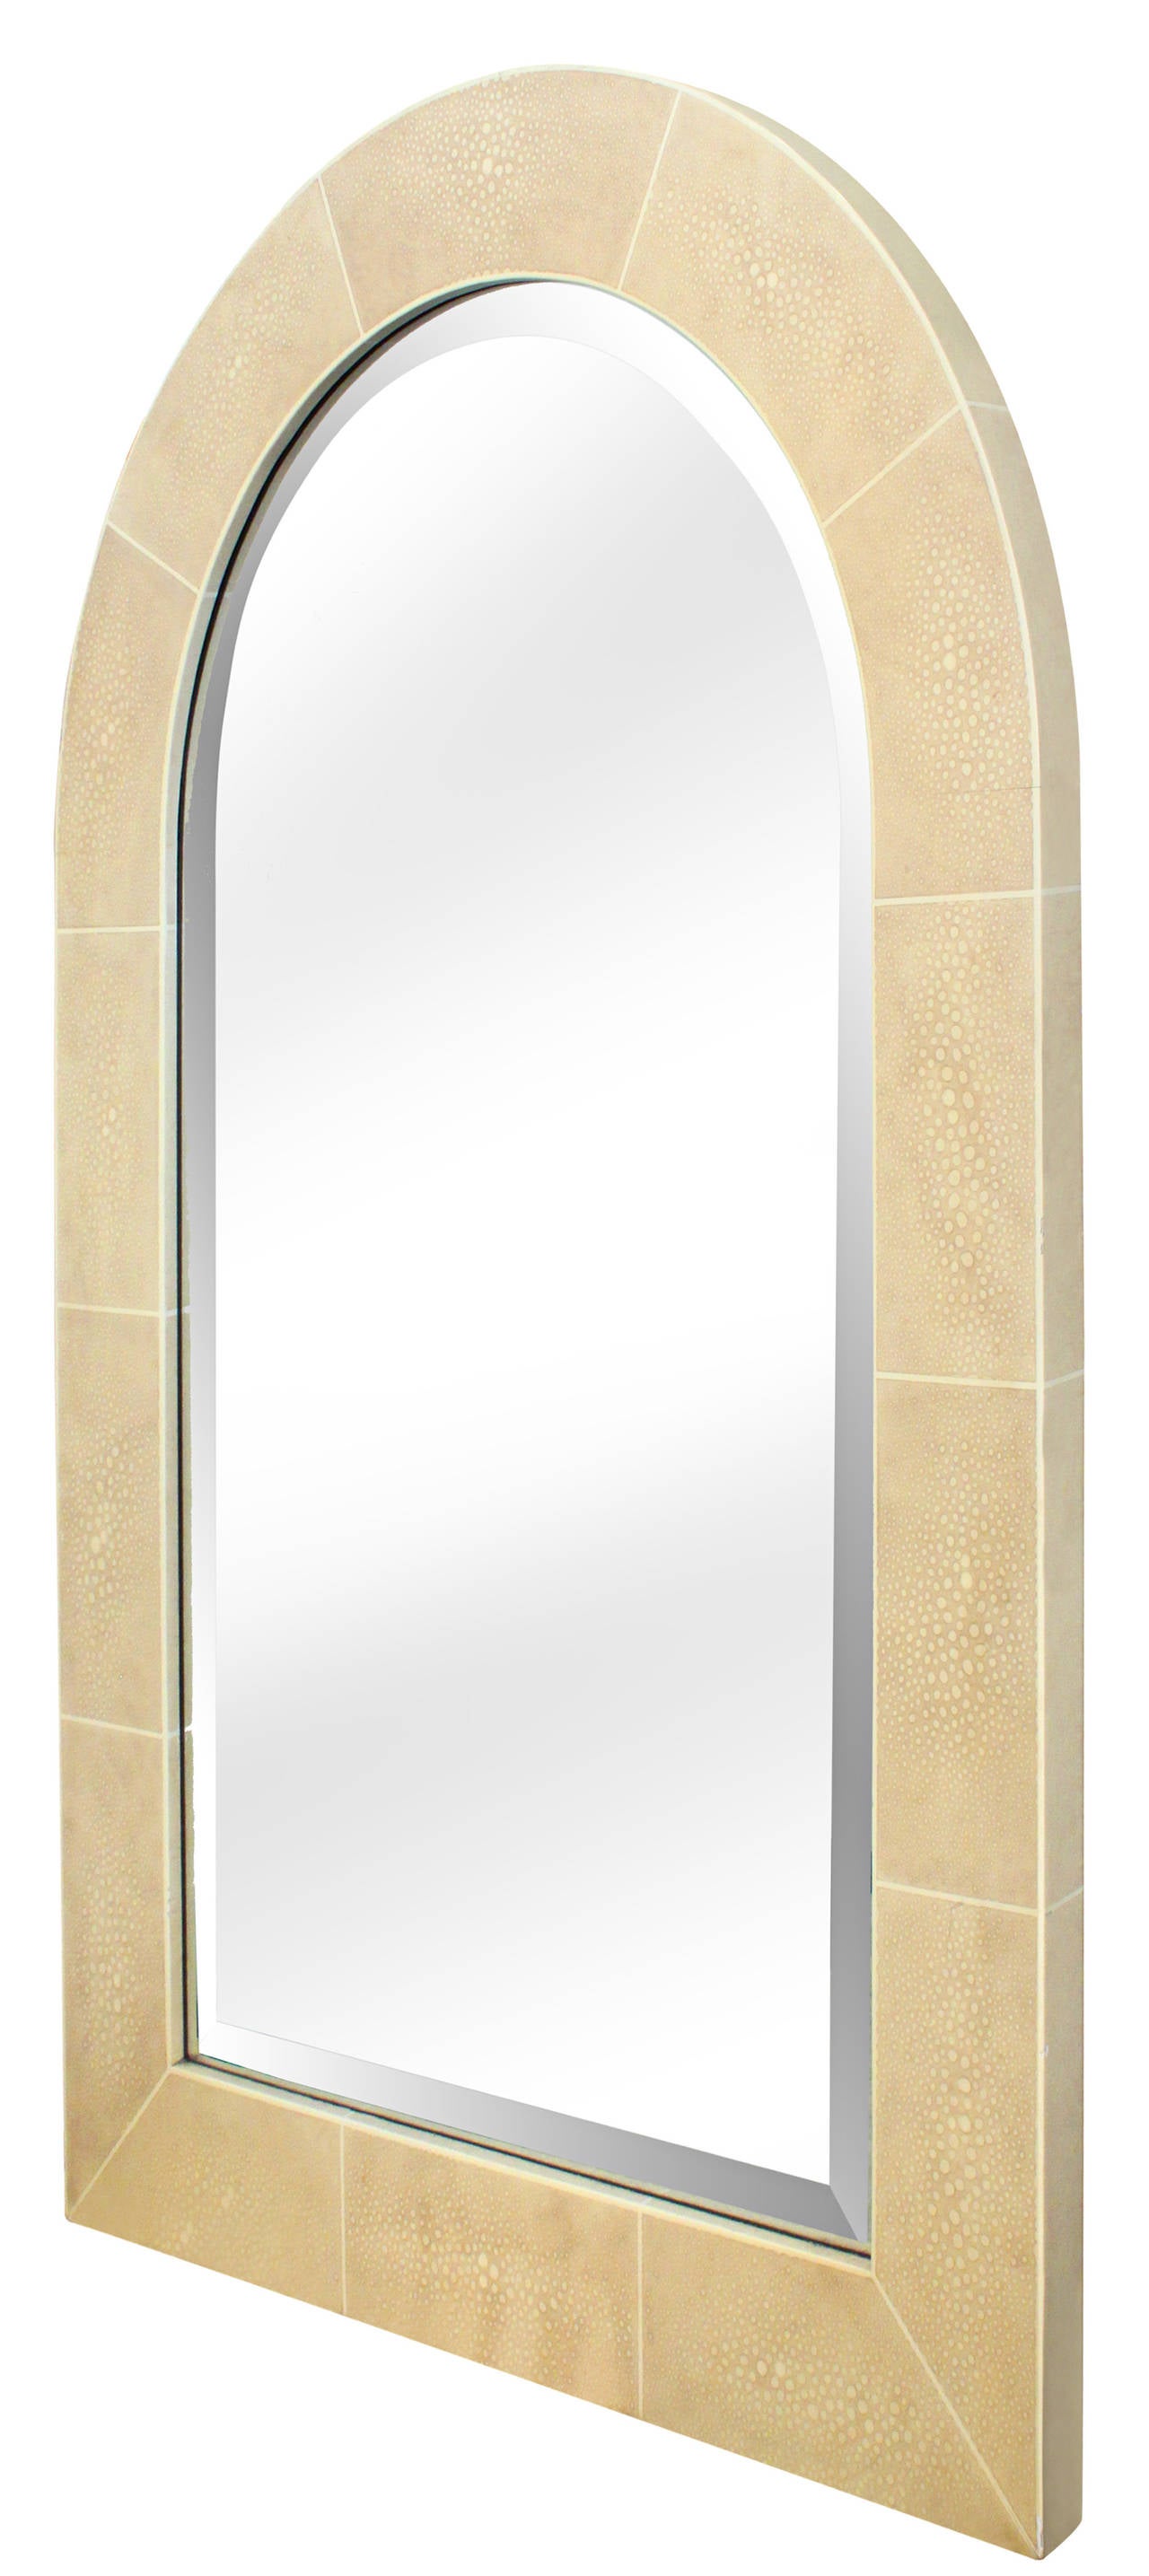 Large wall-hanging arc top mirror with frame in hand-applied beige shagreen  lacquer and inset beveled mirror by Karl Springer, American, 1970s.